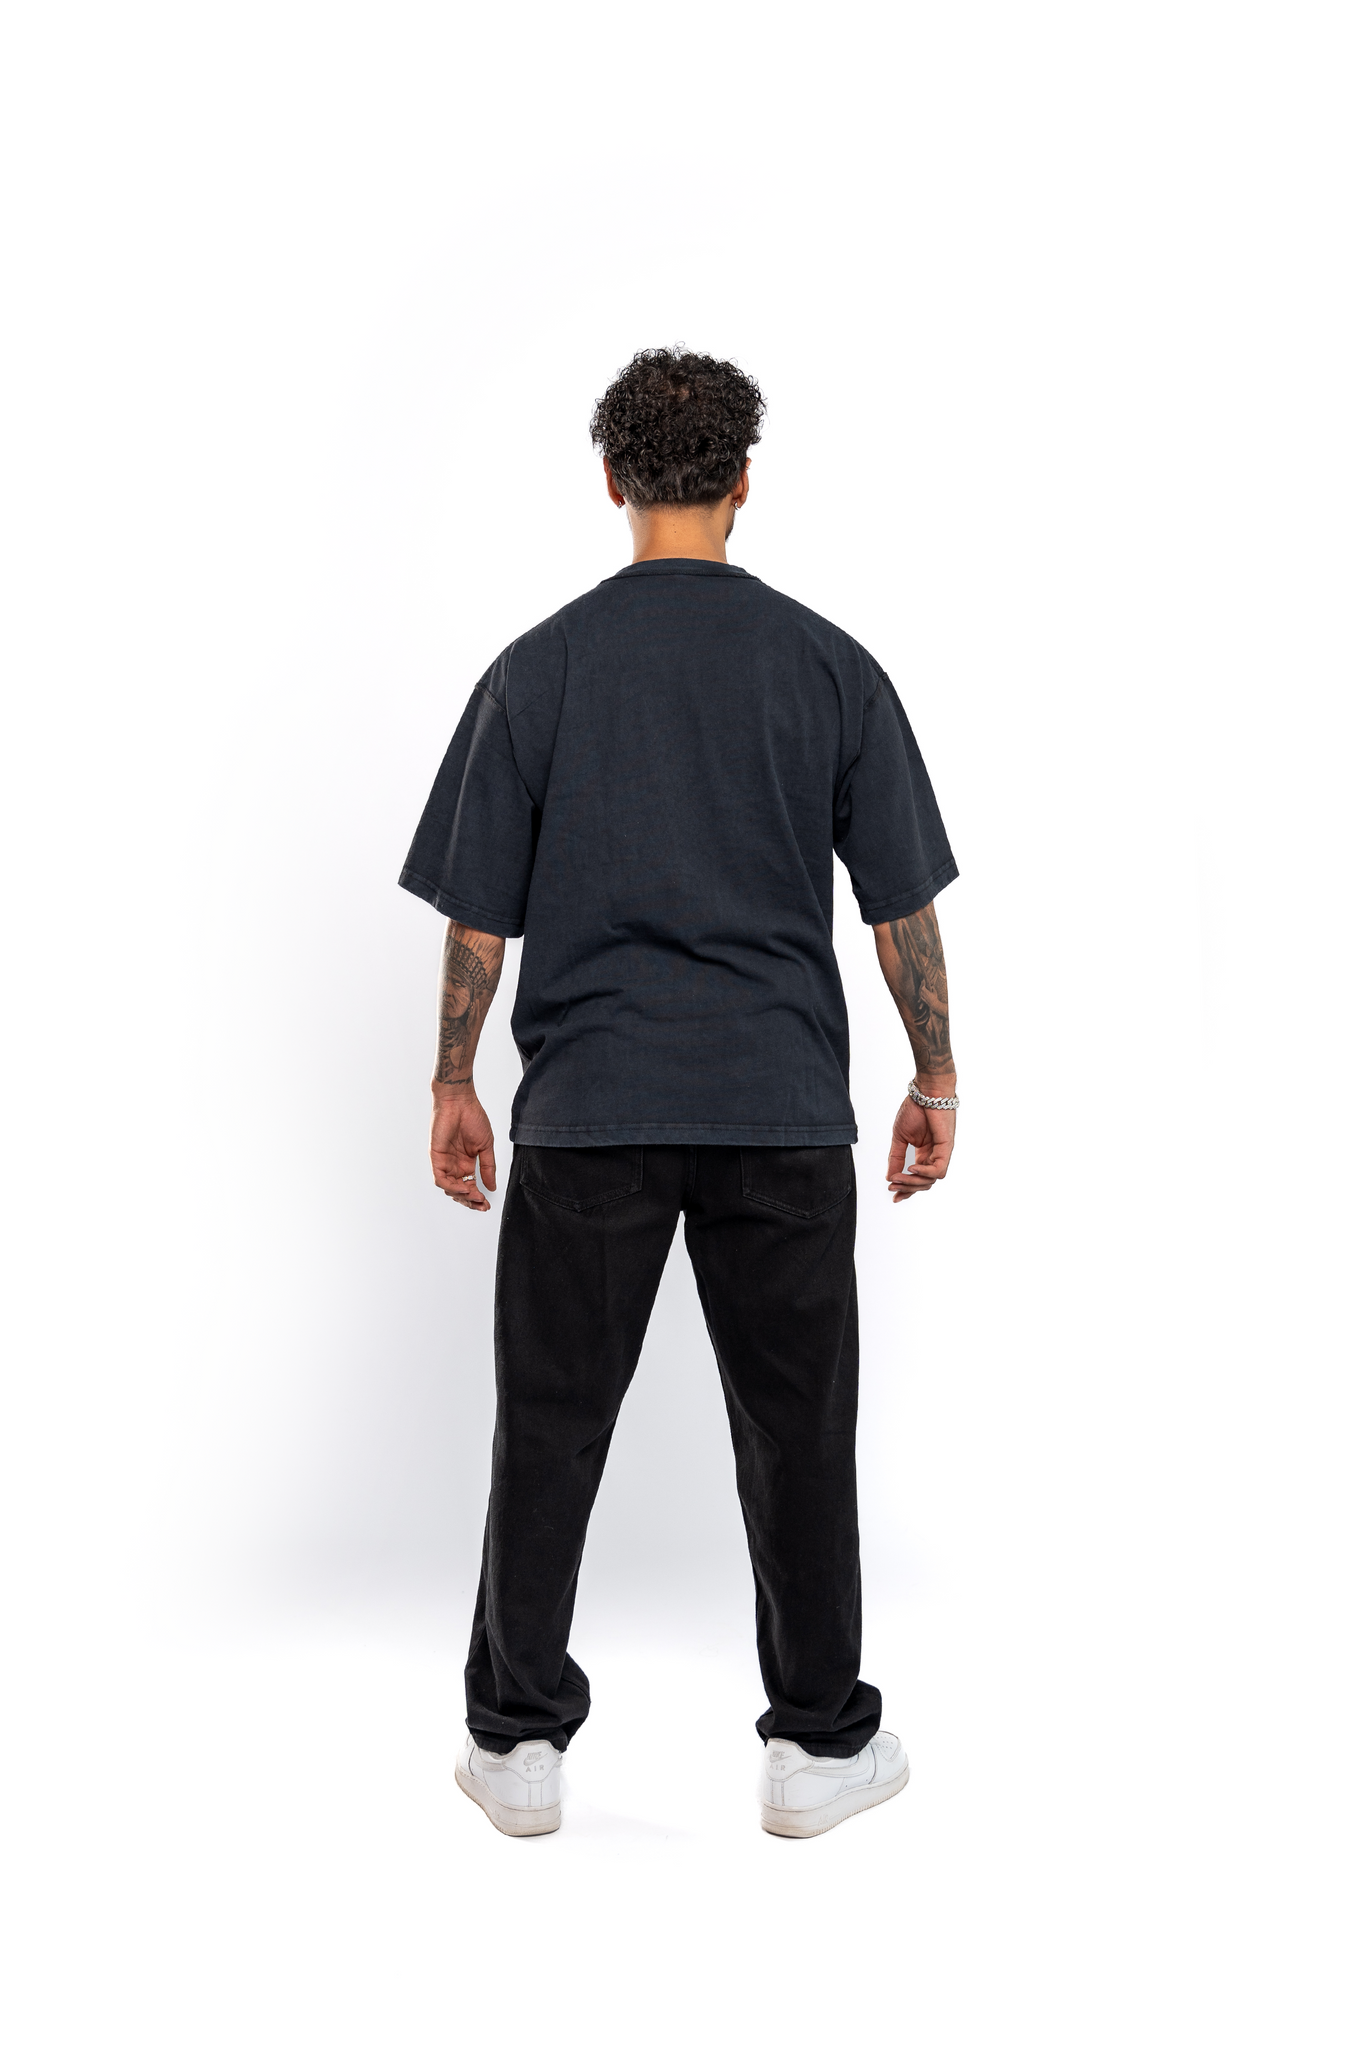 INITIAL WASHED BLACK T-SHIRT